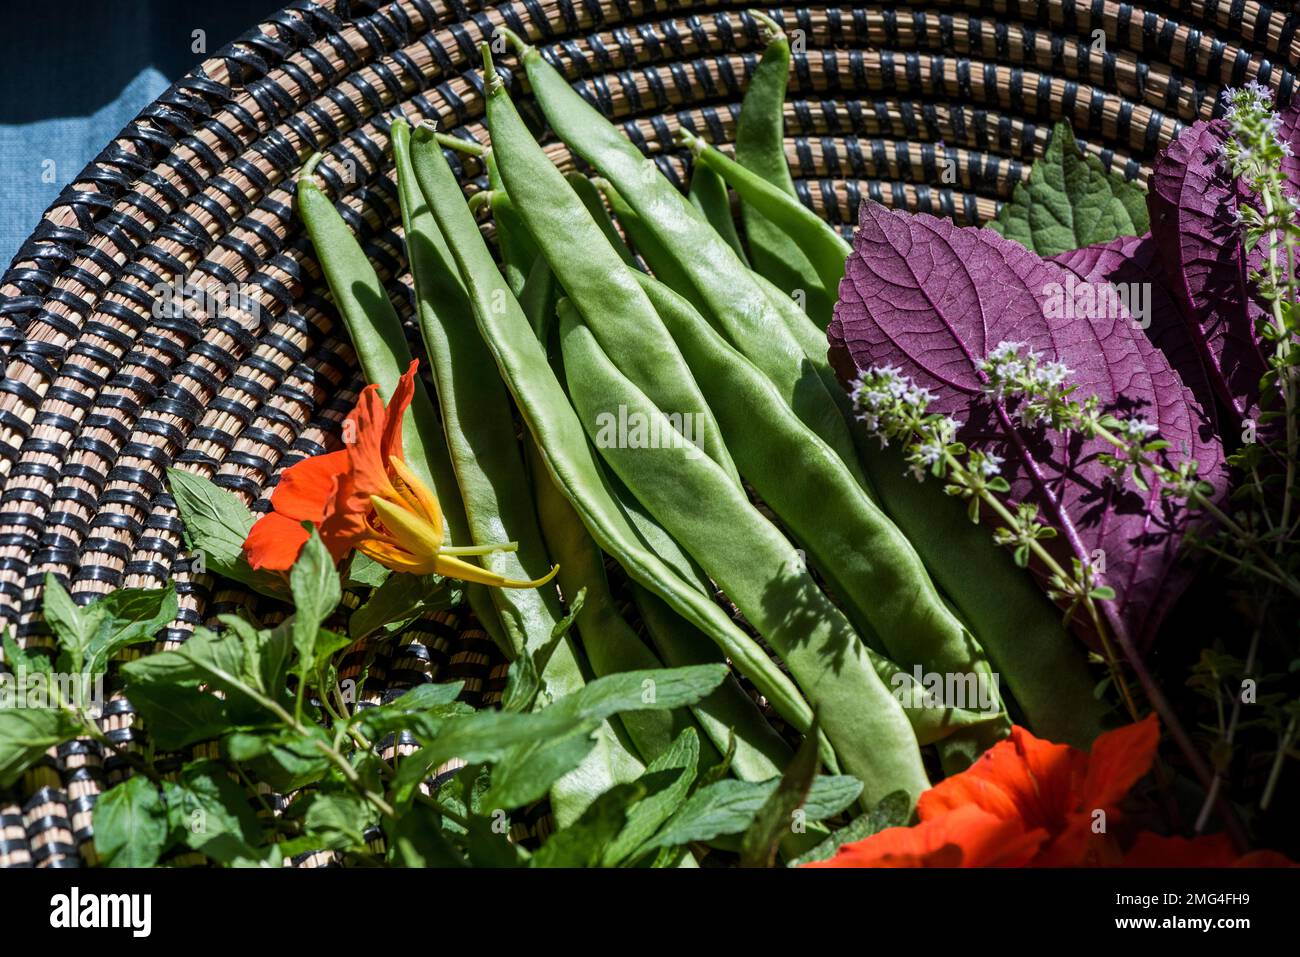 Harvested vegetables, herbs and edible flowers in basket Stock Photo